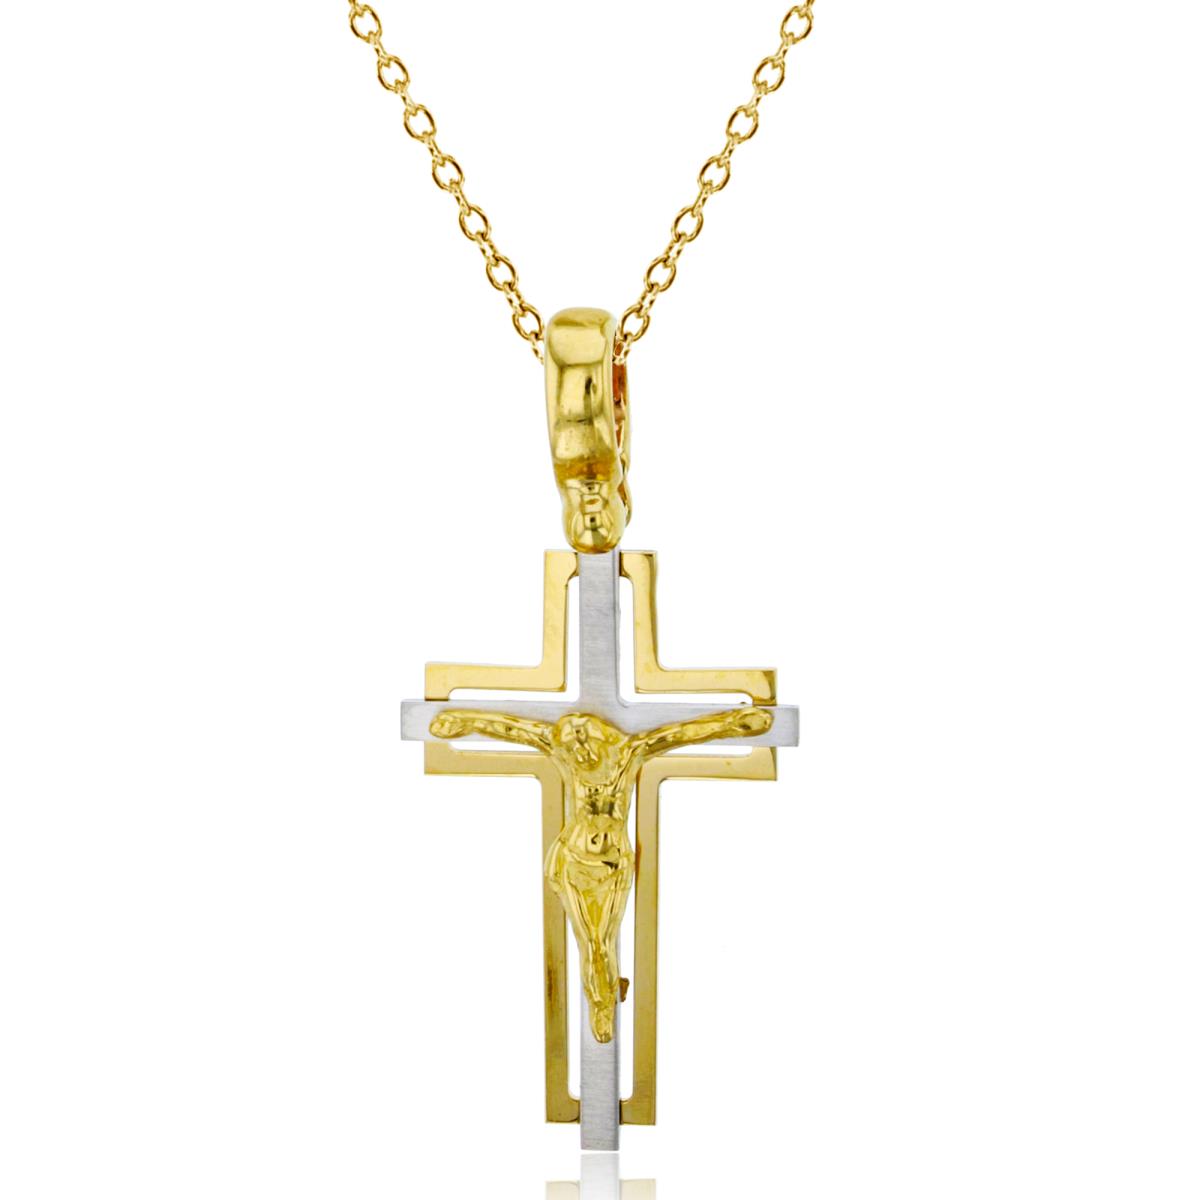 10K Two-Tone Gold Polished & Matte Crucifix Cross 18" Necklace